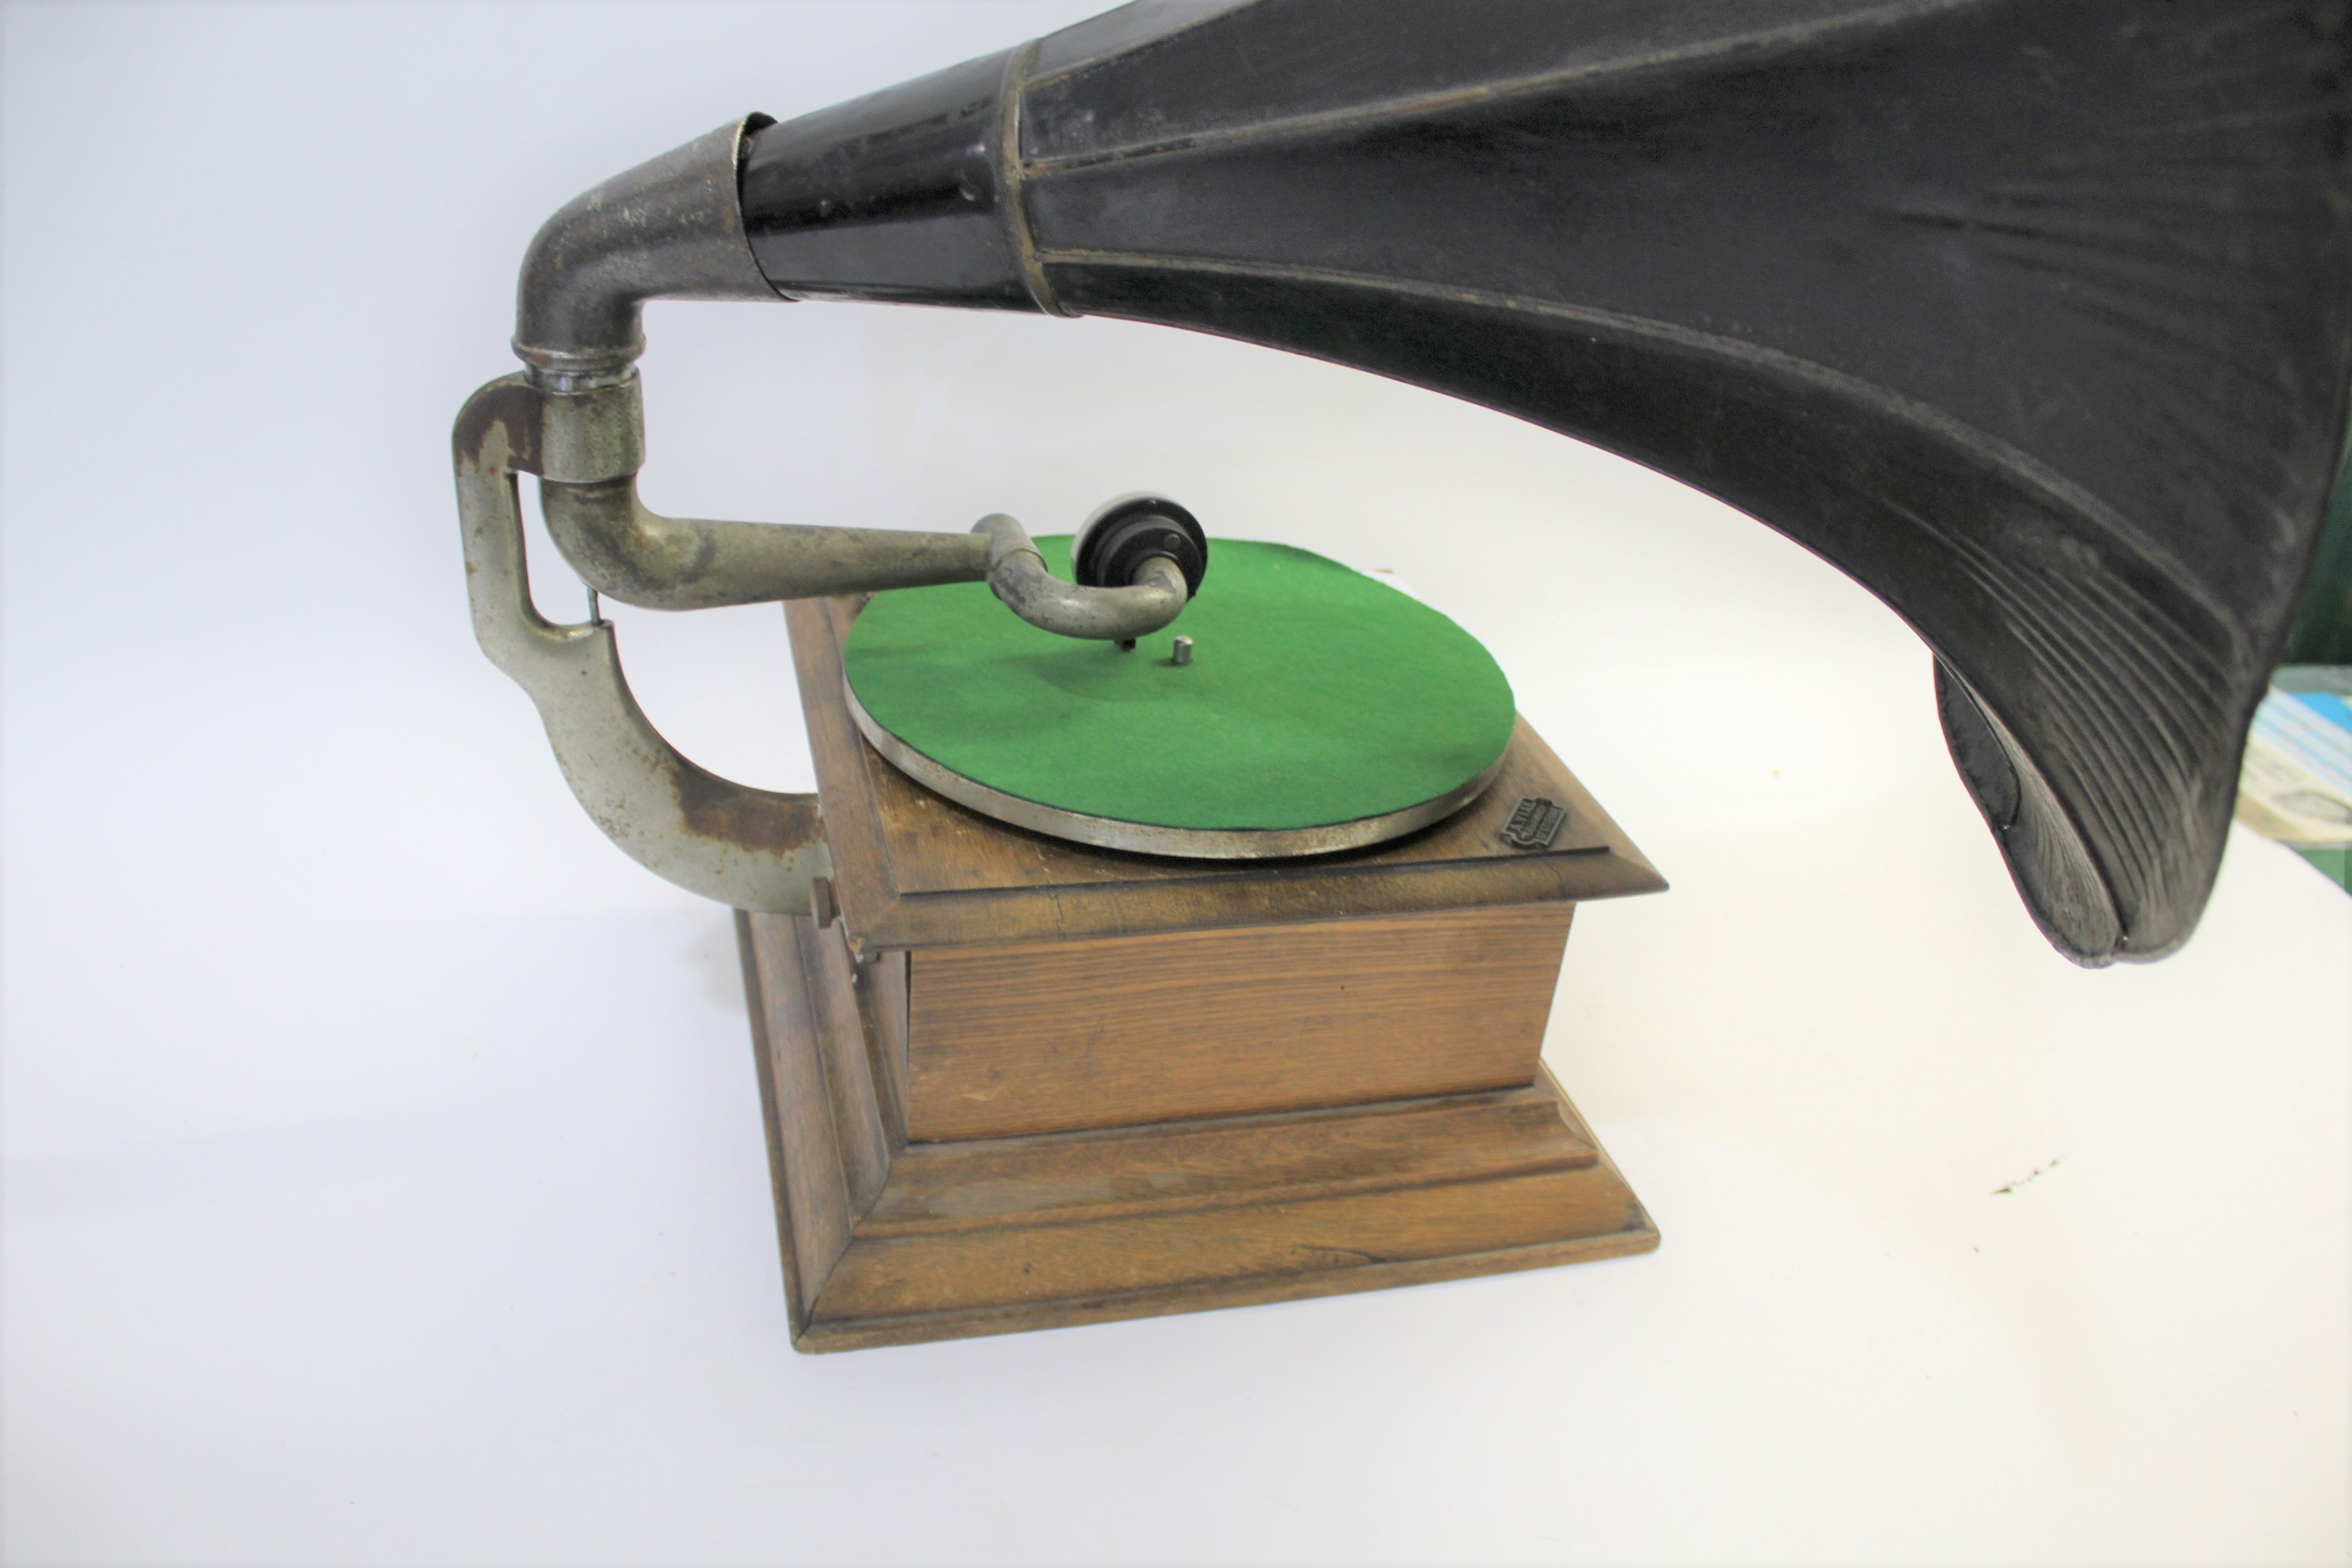 HMV HORN GRAMOPHONE & HORN the gramophone with an oak case and HMV Exhibition soundbox, with a label - Image 3 of 4